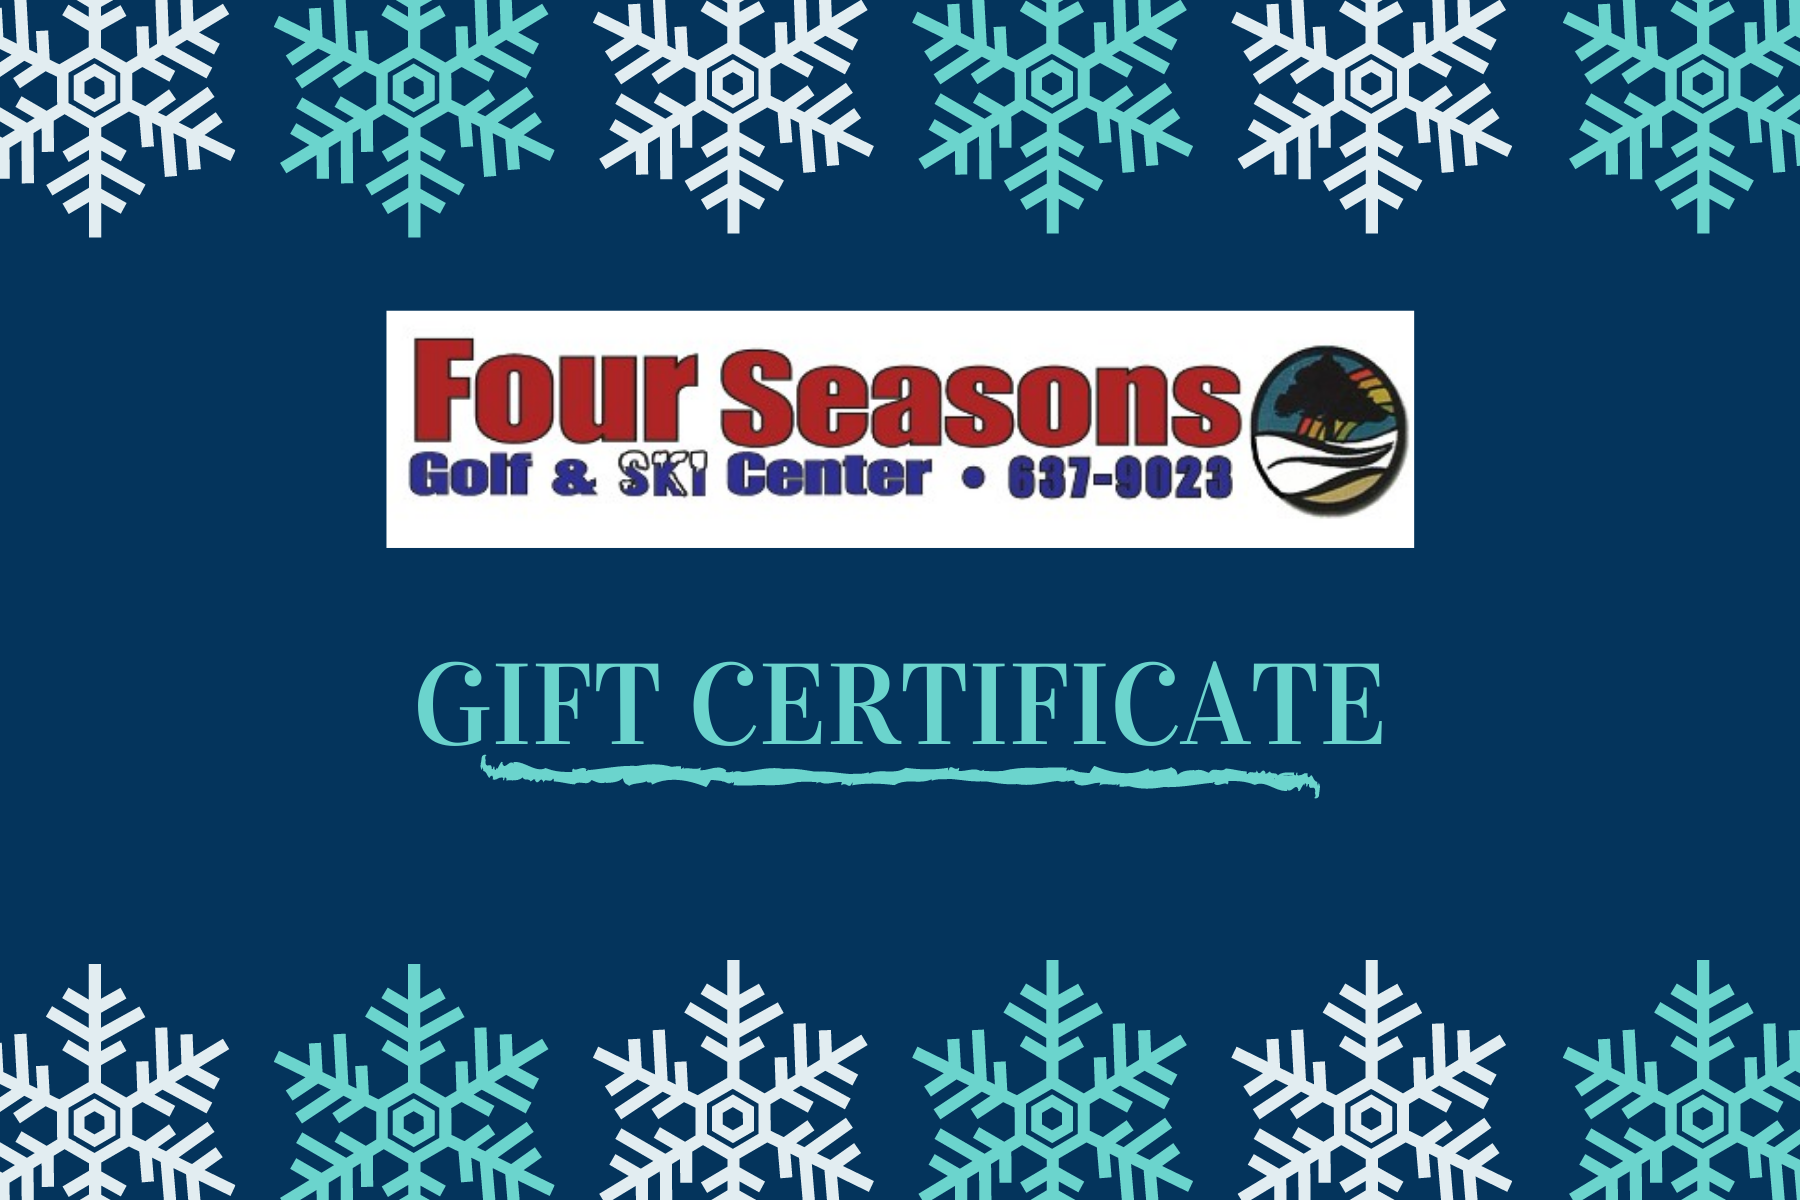 Online Gift Certificate — Four Seasons Golf and Ski Center